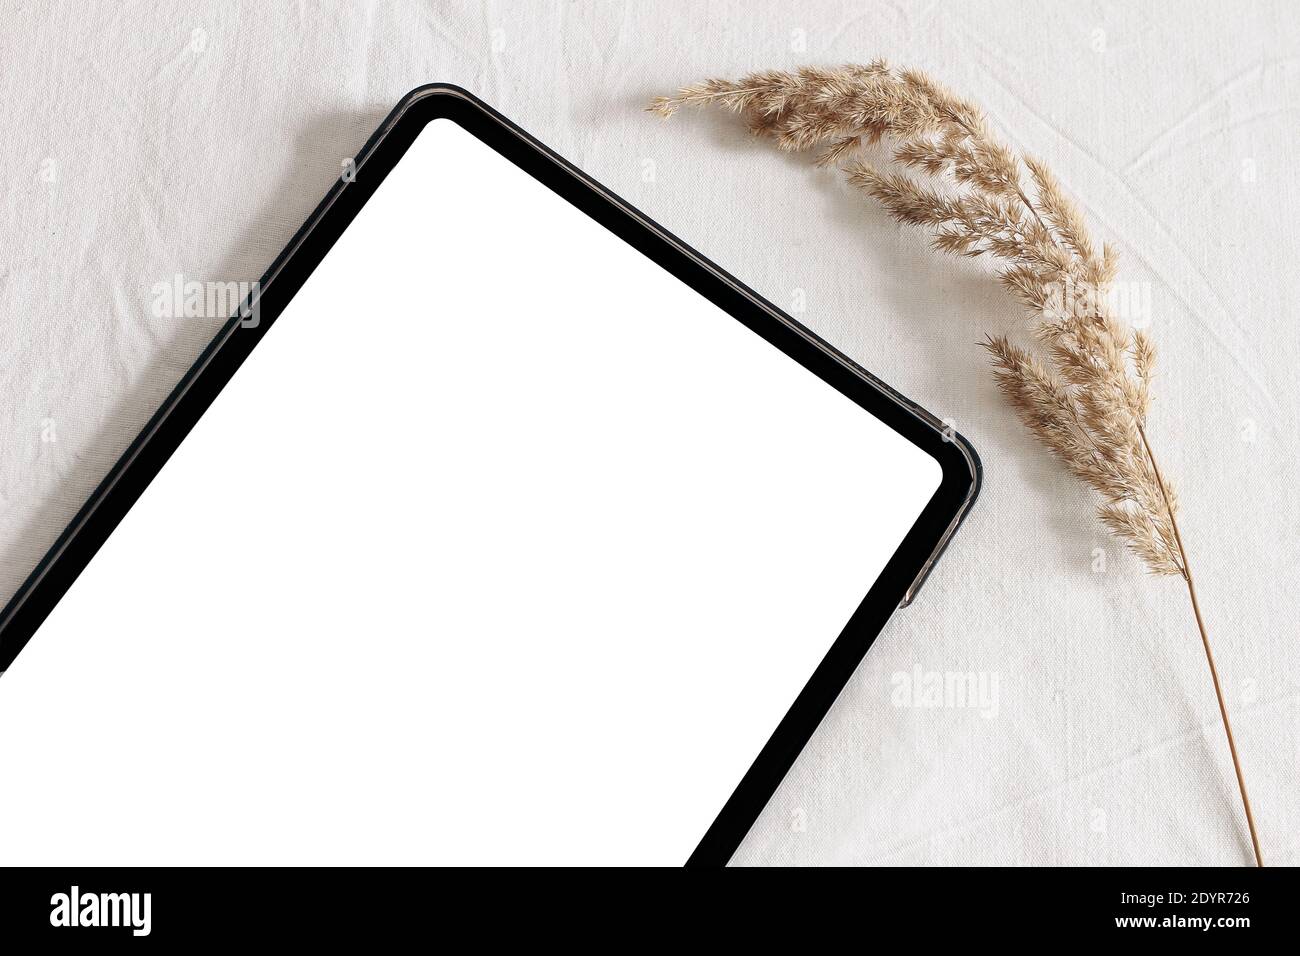 Closeup of tablet with dry grass on table. Blank, empty screen. White linen table cloth background in sunlight. Electronic device mock-up. Modern stil Stock Photo